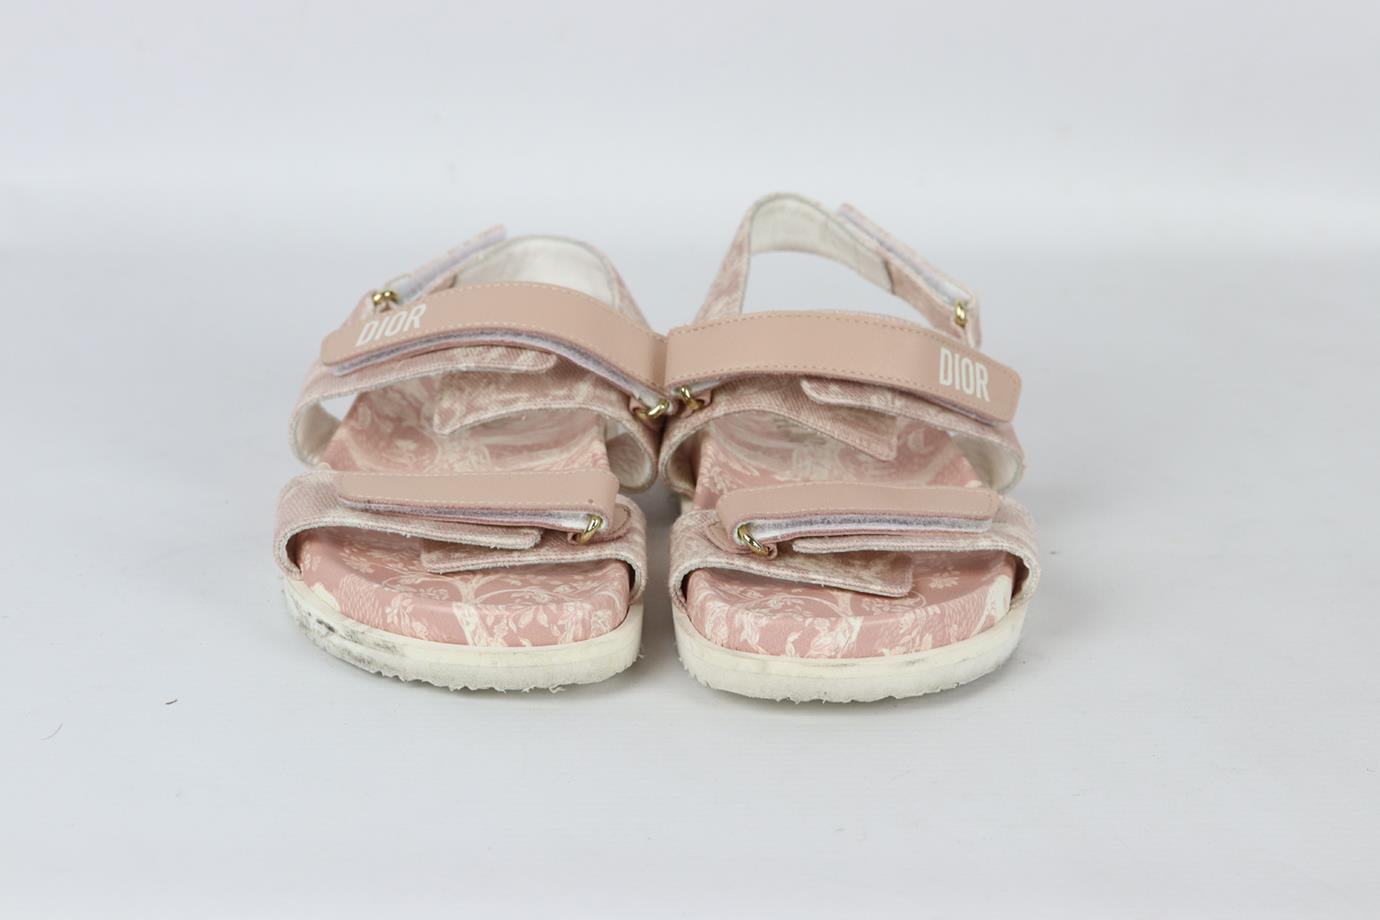 CHRISTIAN DIOR KIDS GIRLS LEATHER AND CANVAS SANDALS EU 32 UK 13